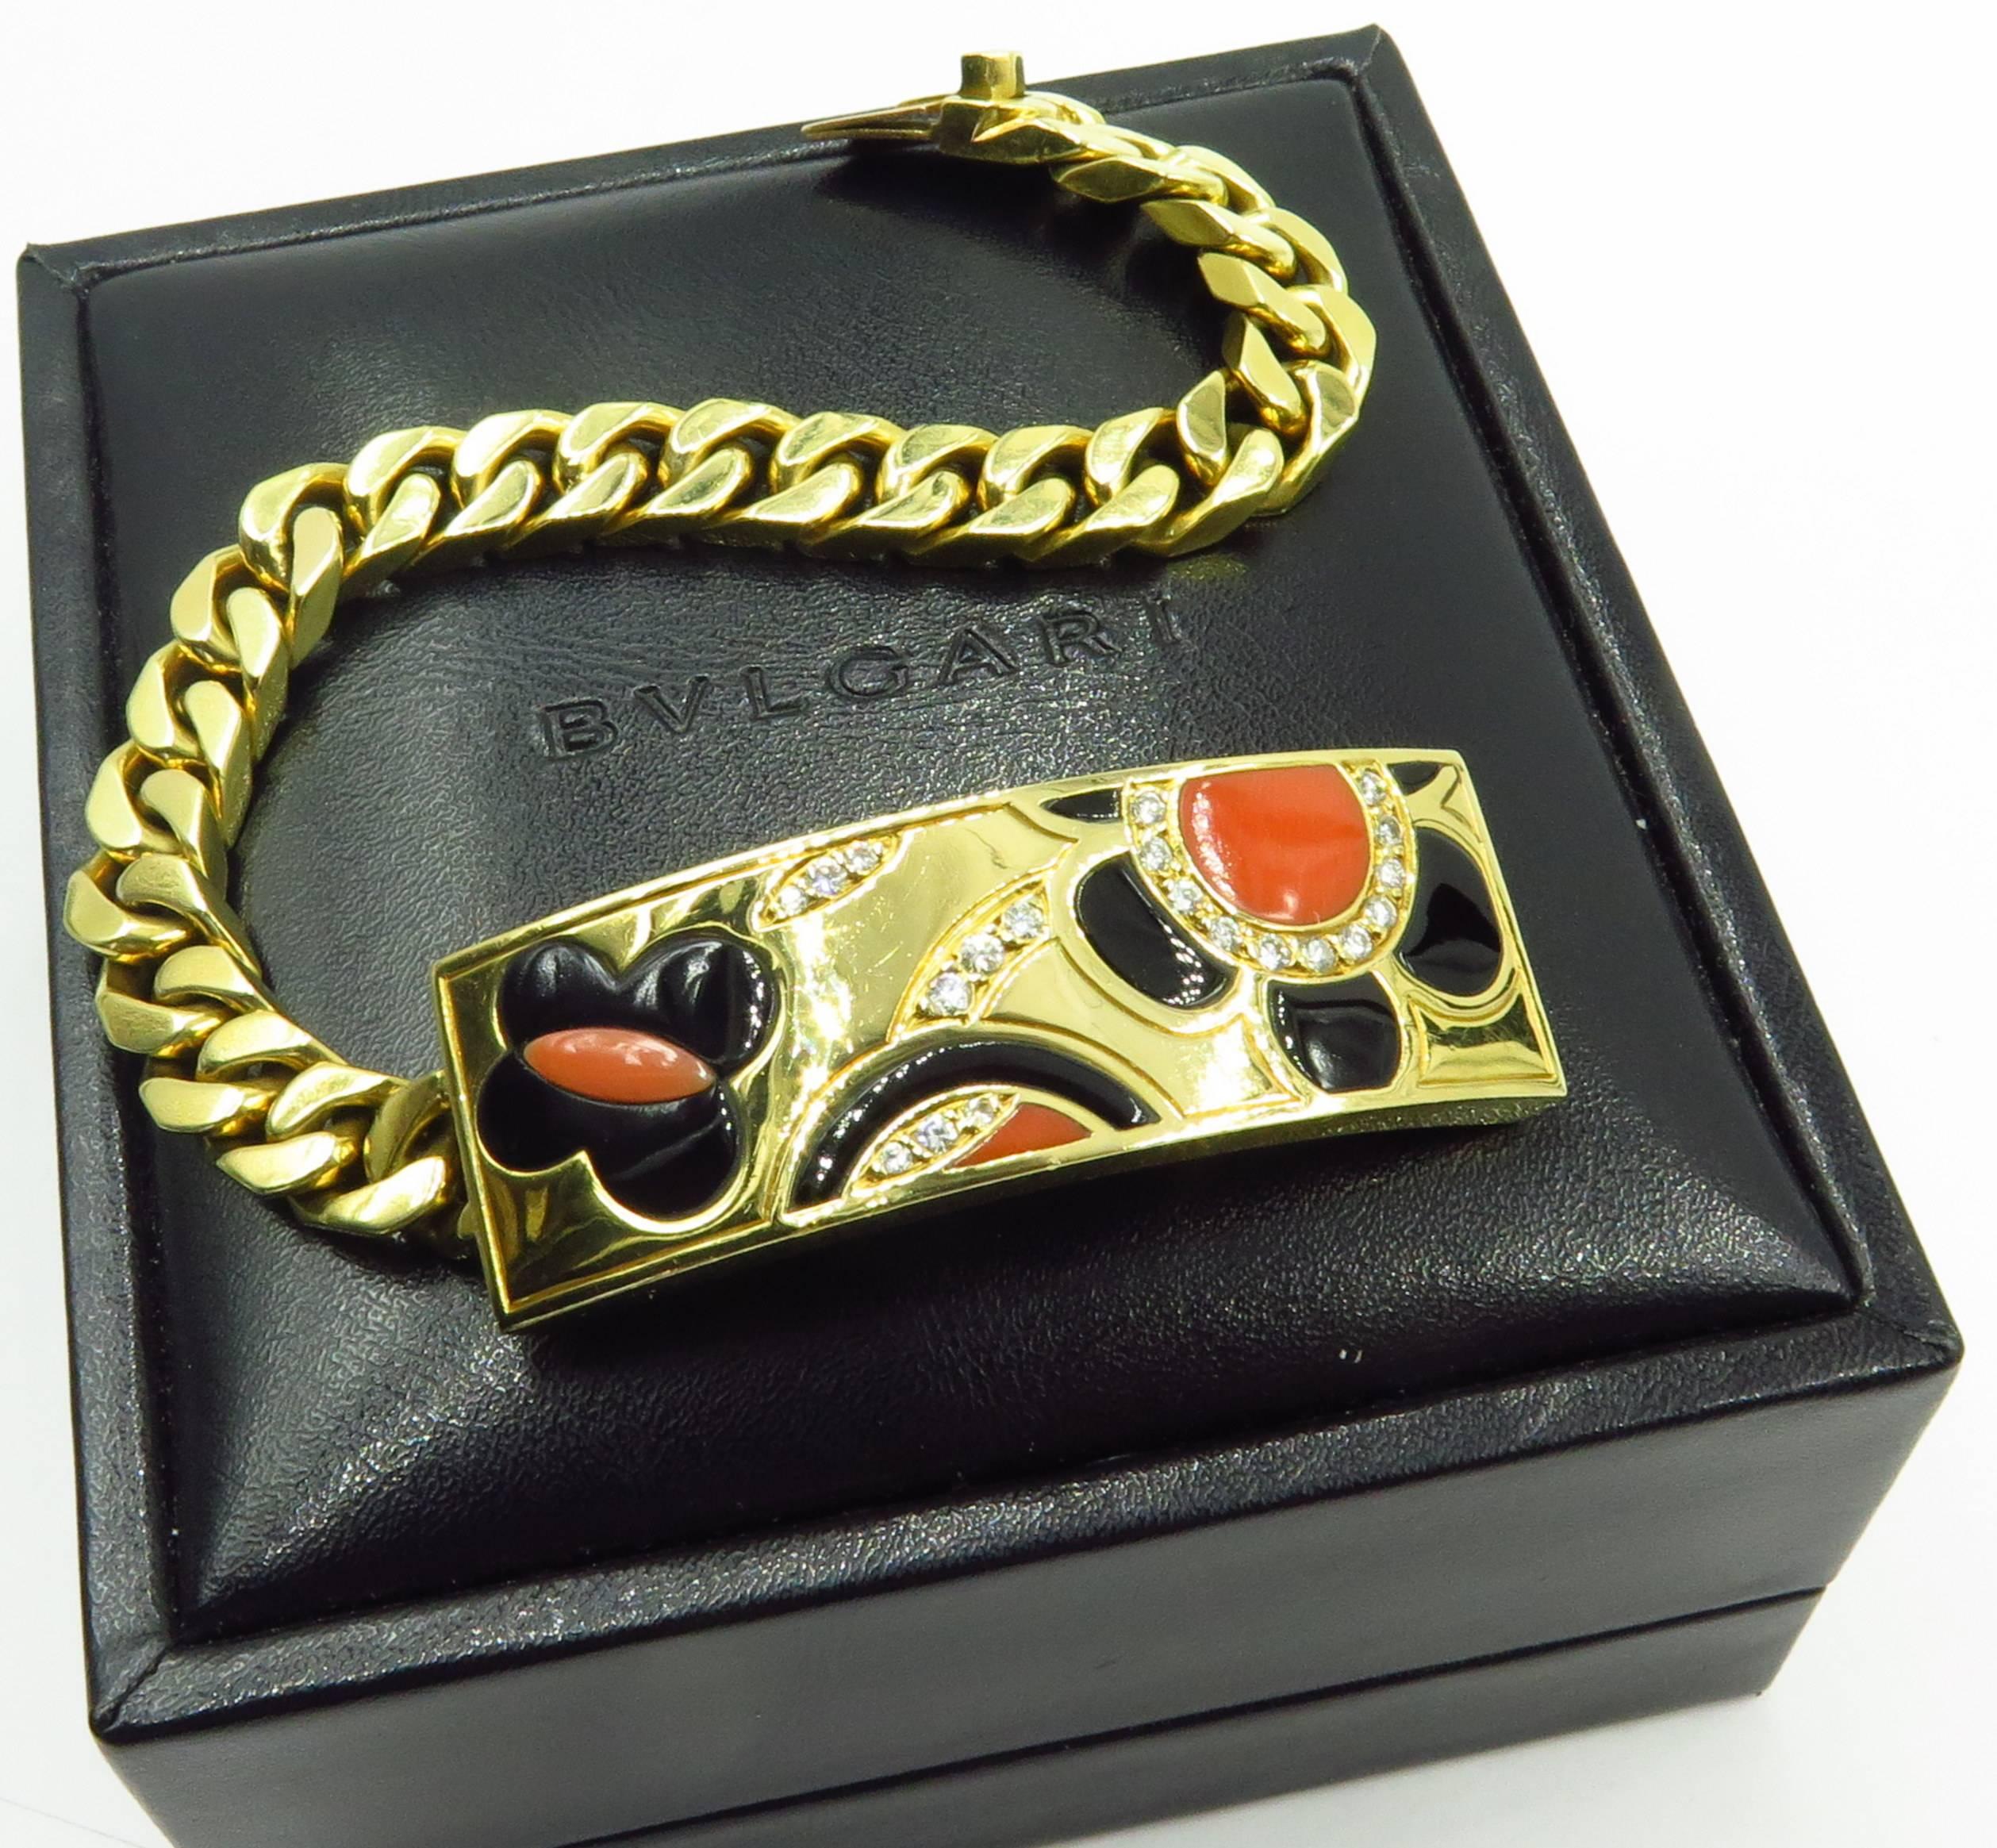 This beautiful Bvlgari 18k gold bracelet is just awesome. With it's inlaid flower motif, butterfly, and flowing lines, it feels like springtime. It is finished with a hidden box link. This is a rare and very hard to find piece from Bvlgari.

This